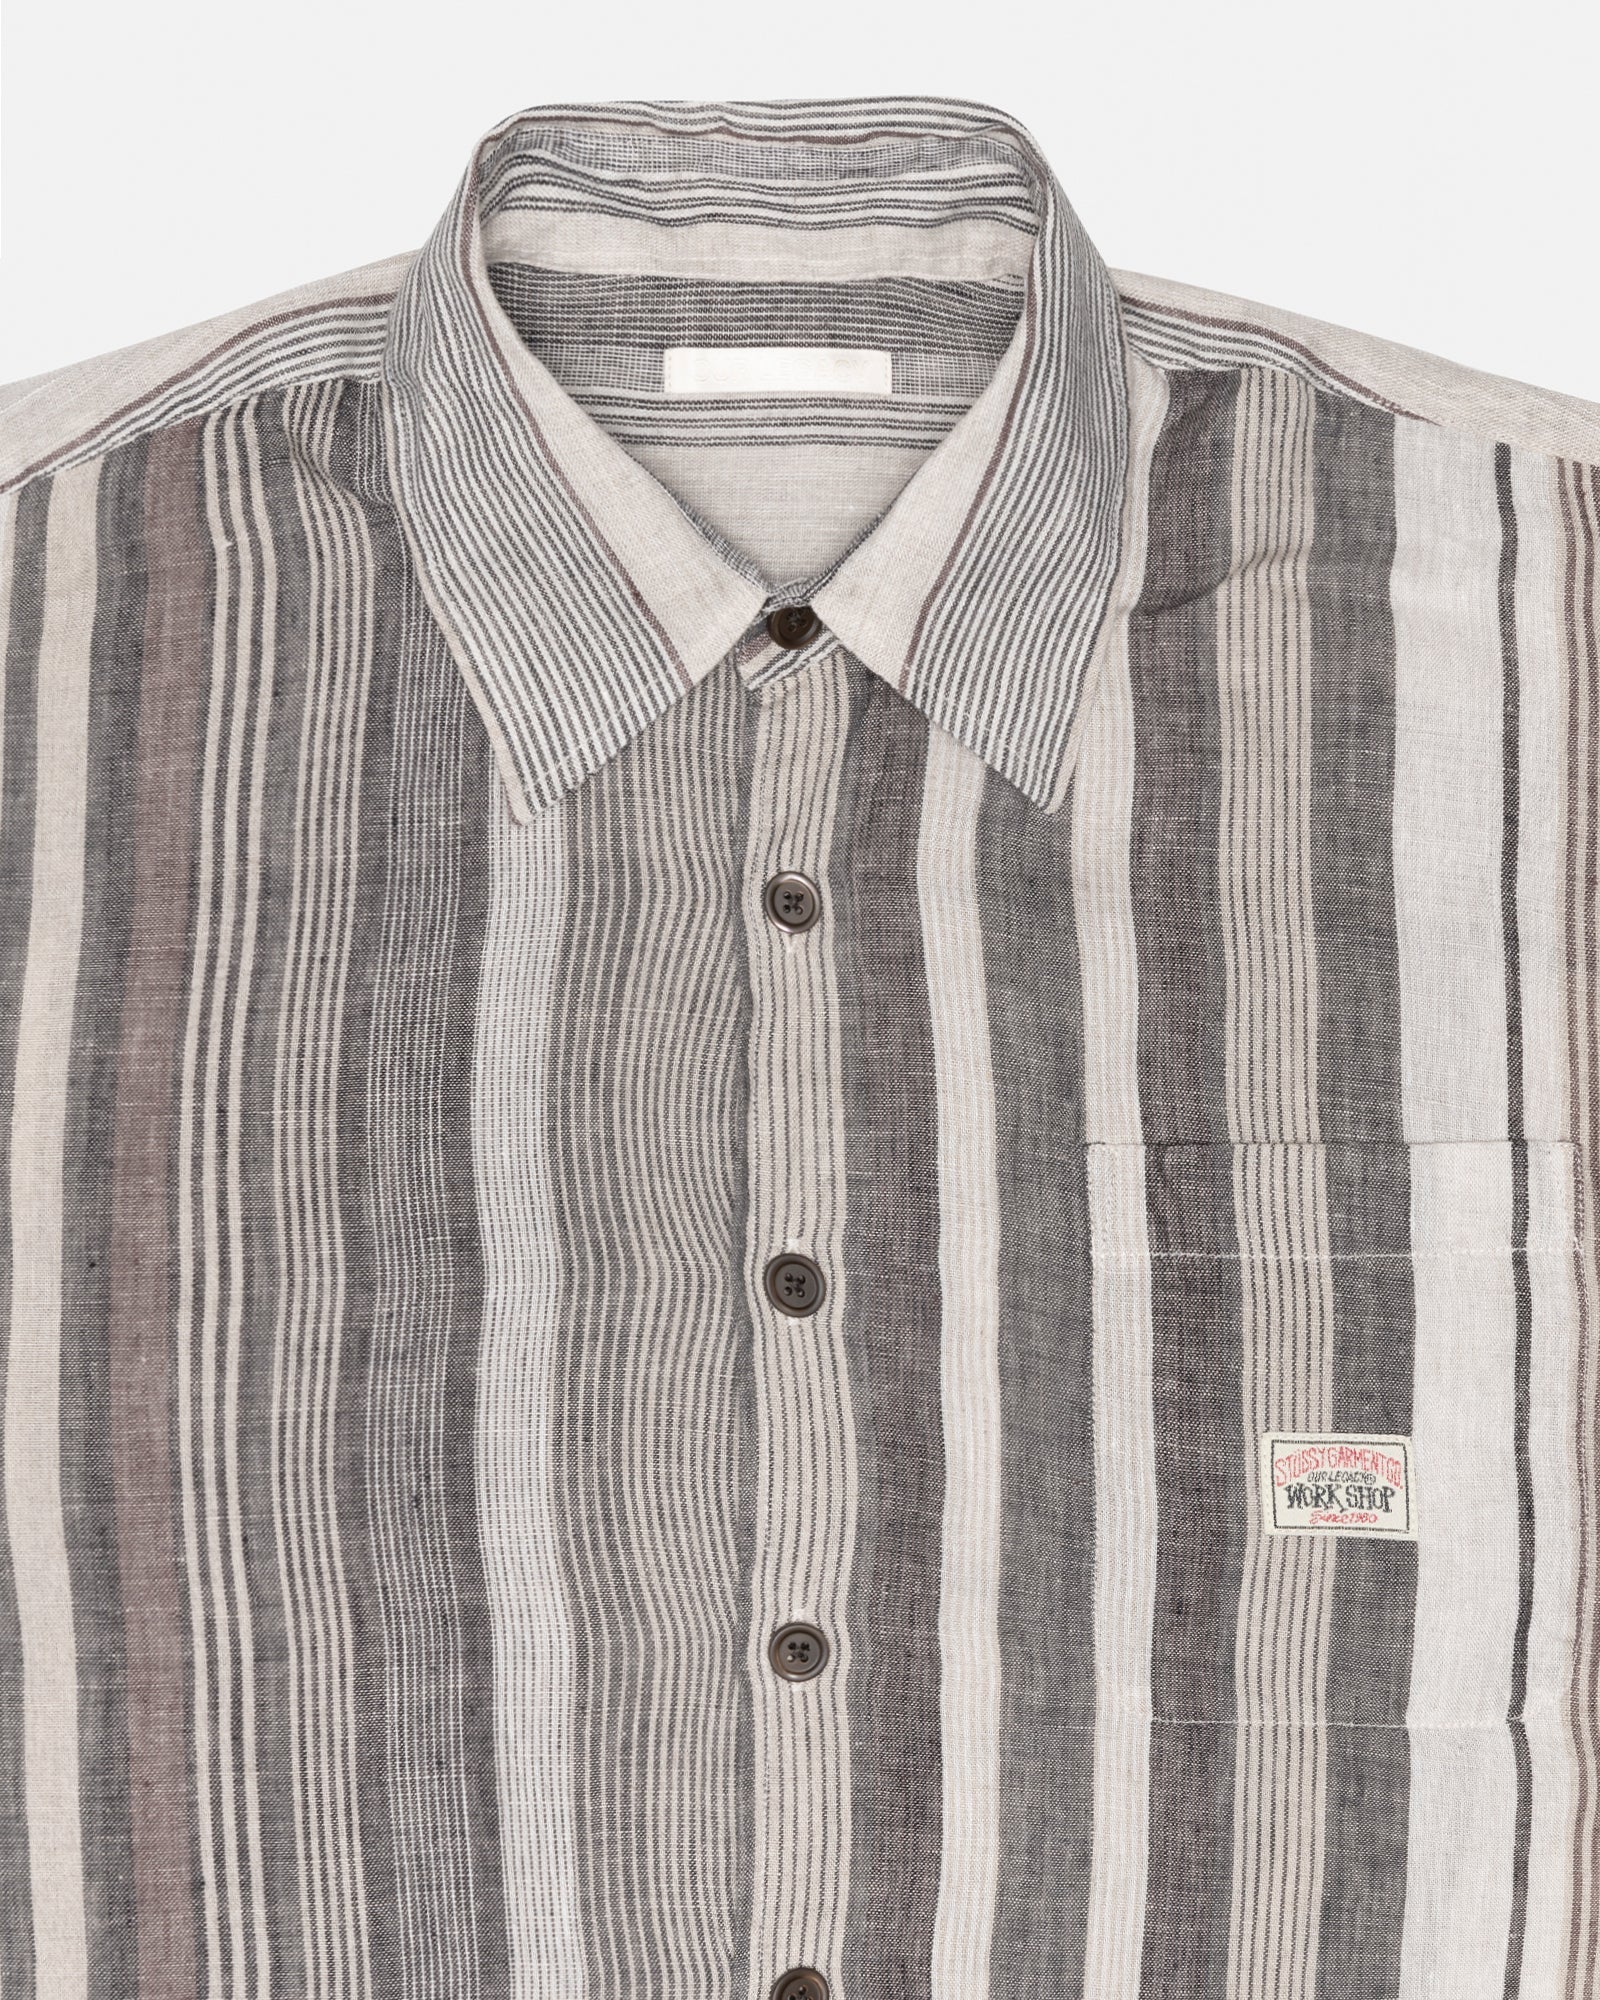 STUSSY OUR LEGACY STRIPED SHIRT SIZE M-